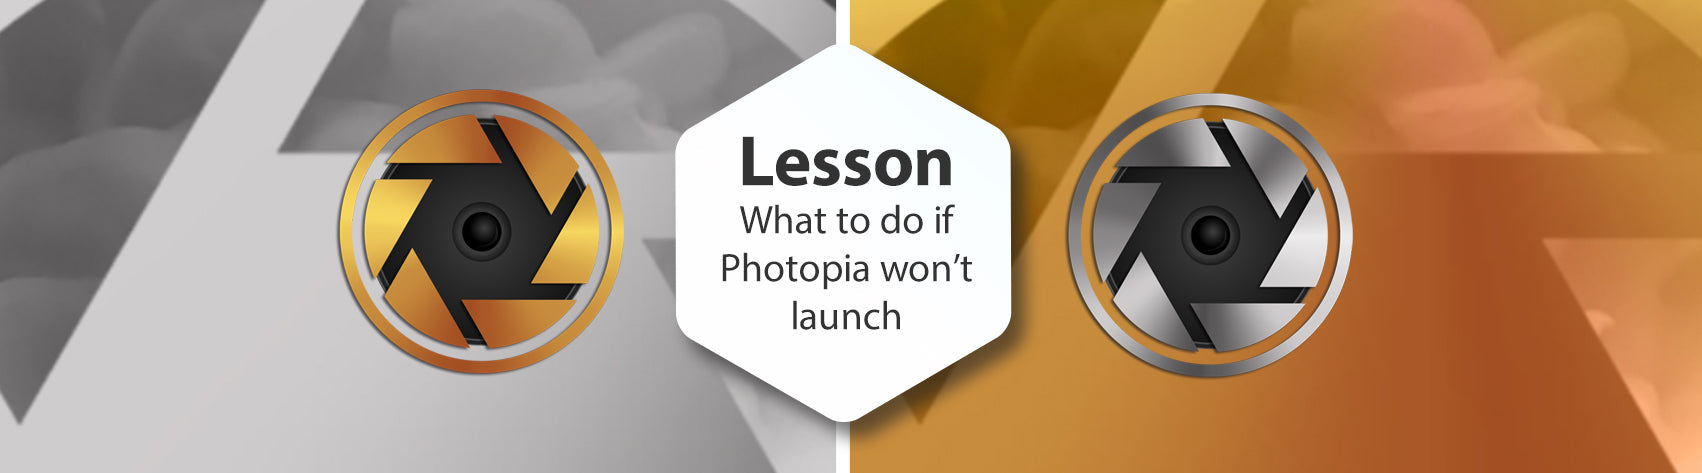 Lesson - What to do if Photopia won't launch